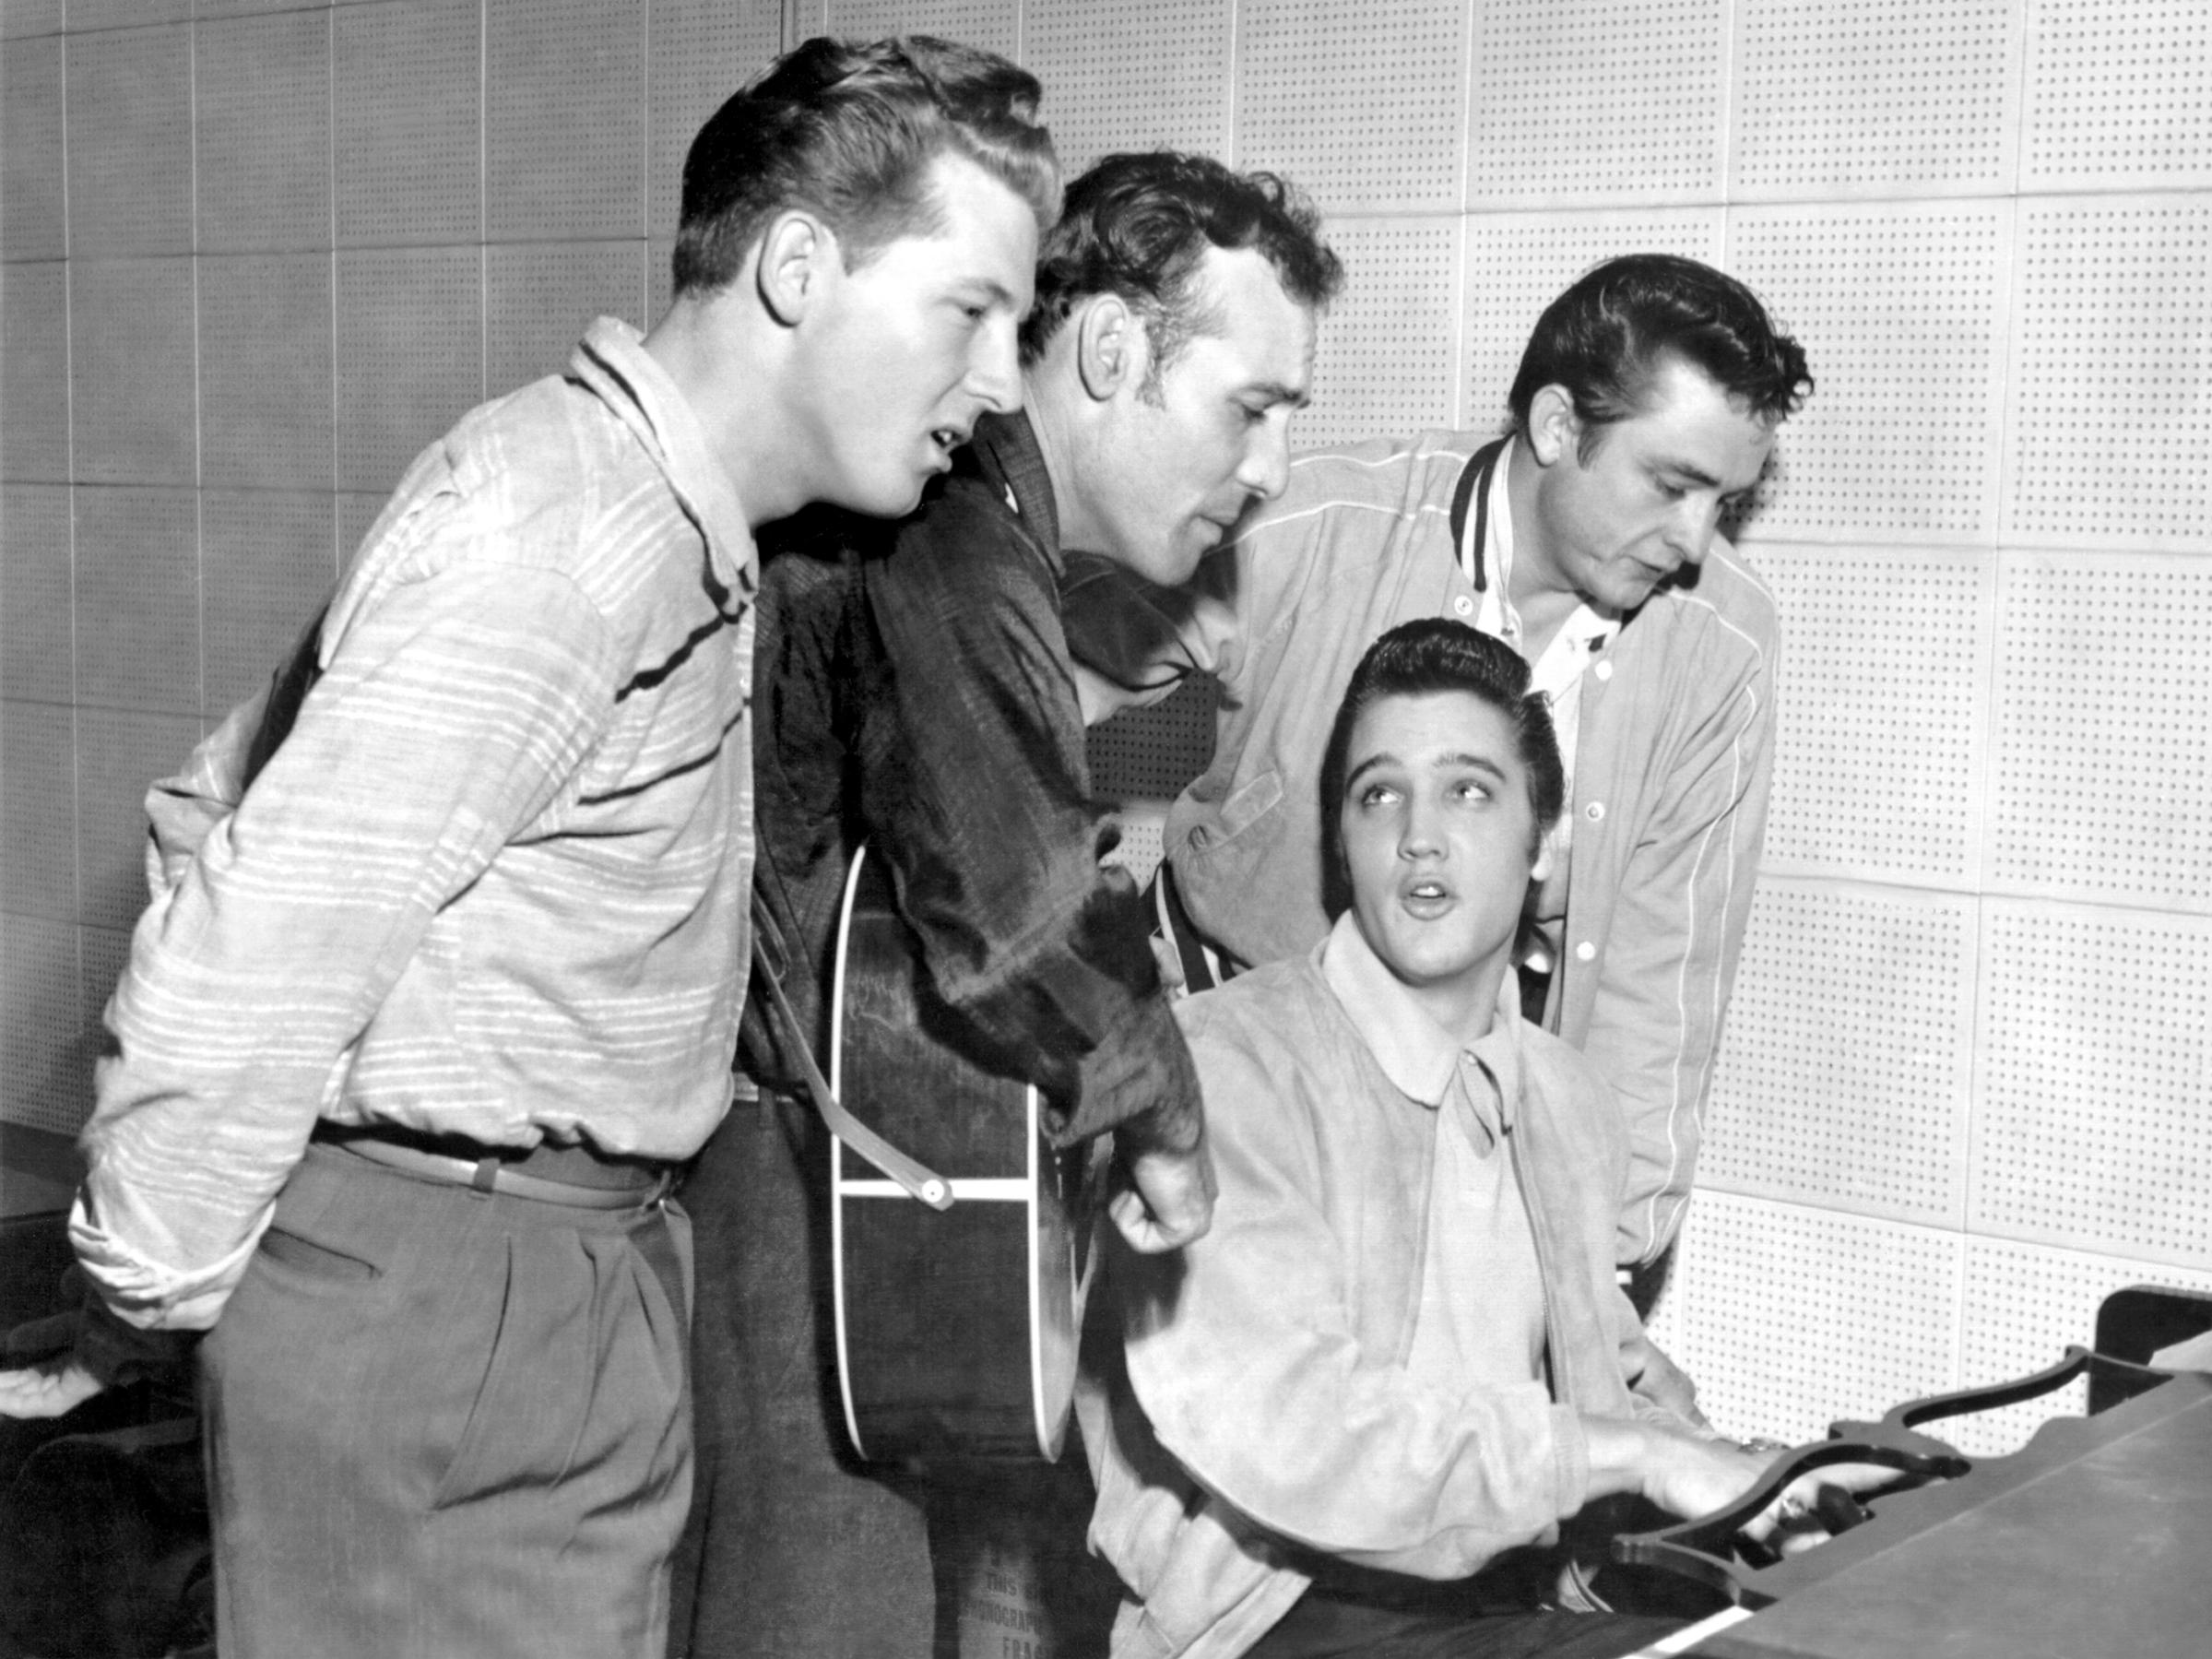 Rock and roll musicians Jerry Lee Lewis, Carl Perkins, Elvis Presley and Johnny Cash as "The Million Dollar Quartet" December 4, 1956 in Memphis, Tennessee. This was a one night jam session at Sun Studios.